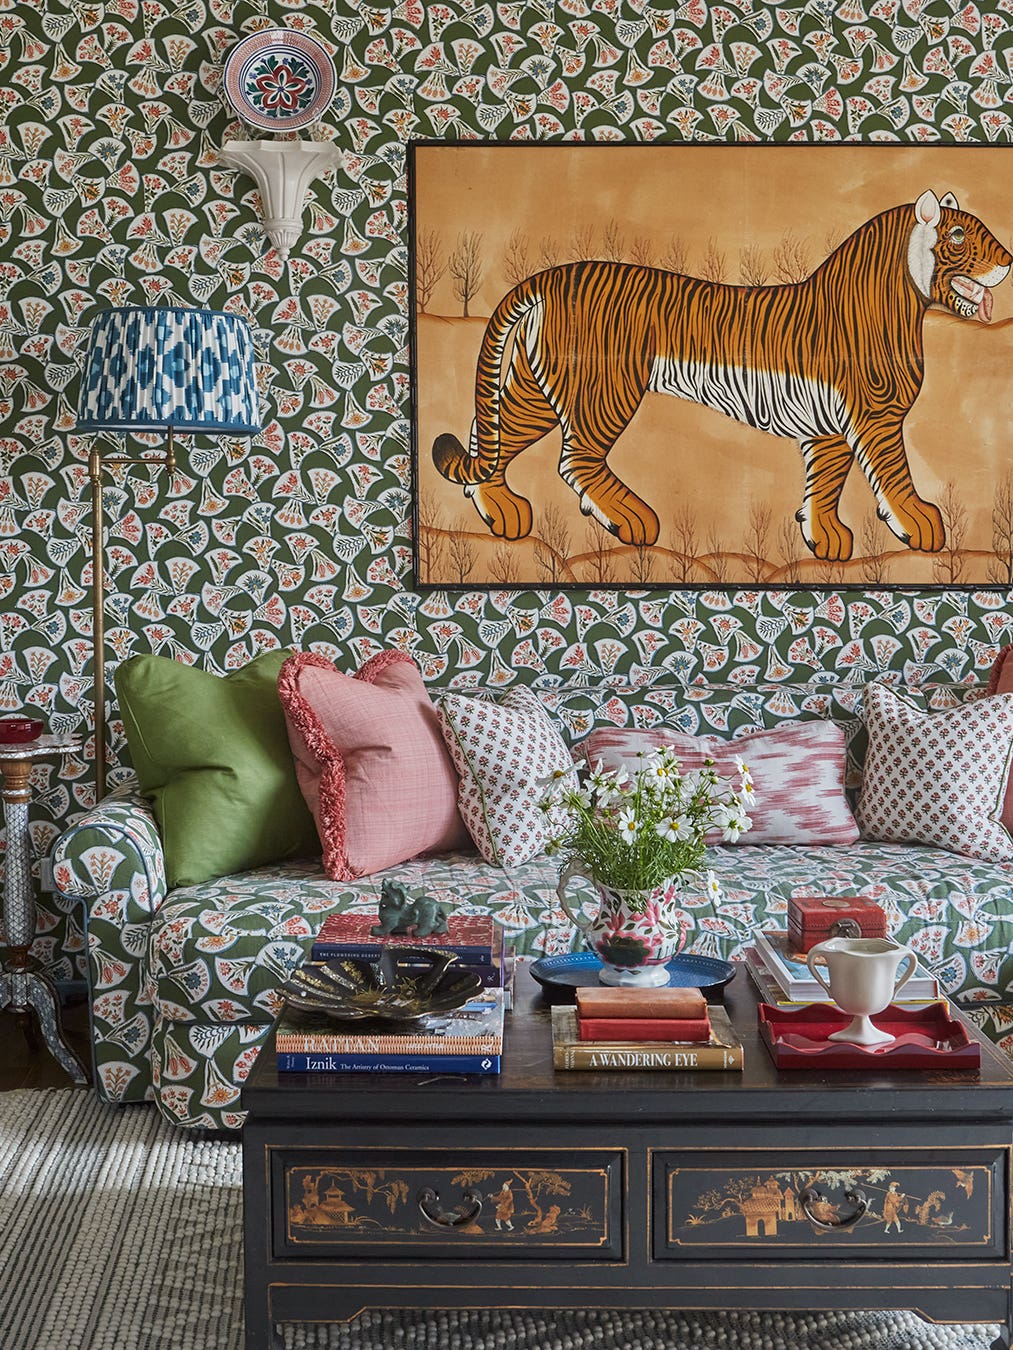 green patterned wallpaper and sofa with tiger artwork